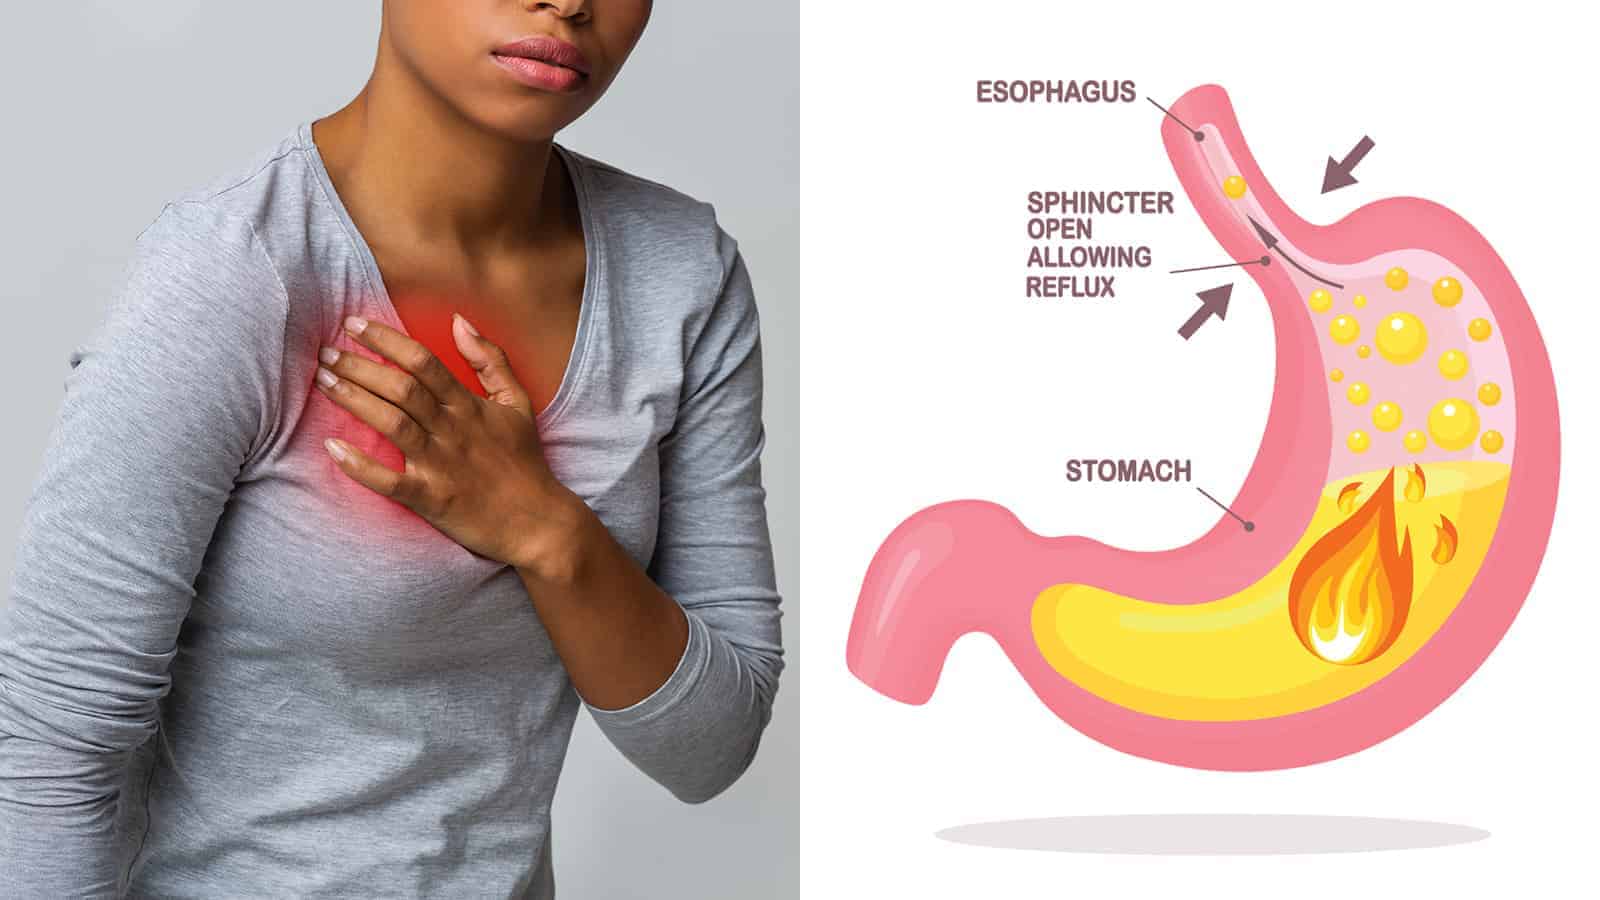 Doctors Reveal 4 Ways To Avoid Heartburn (And 5 Ways to Fix It)